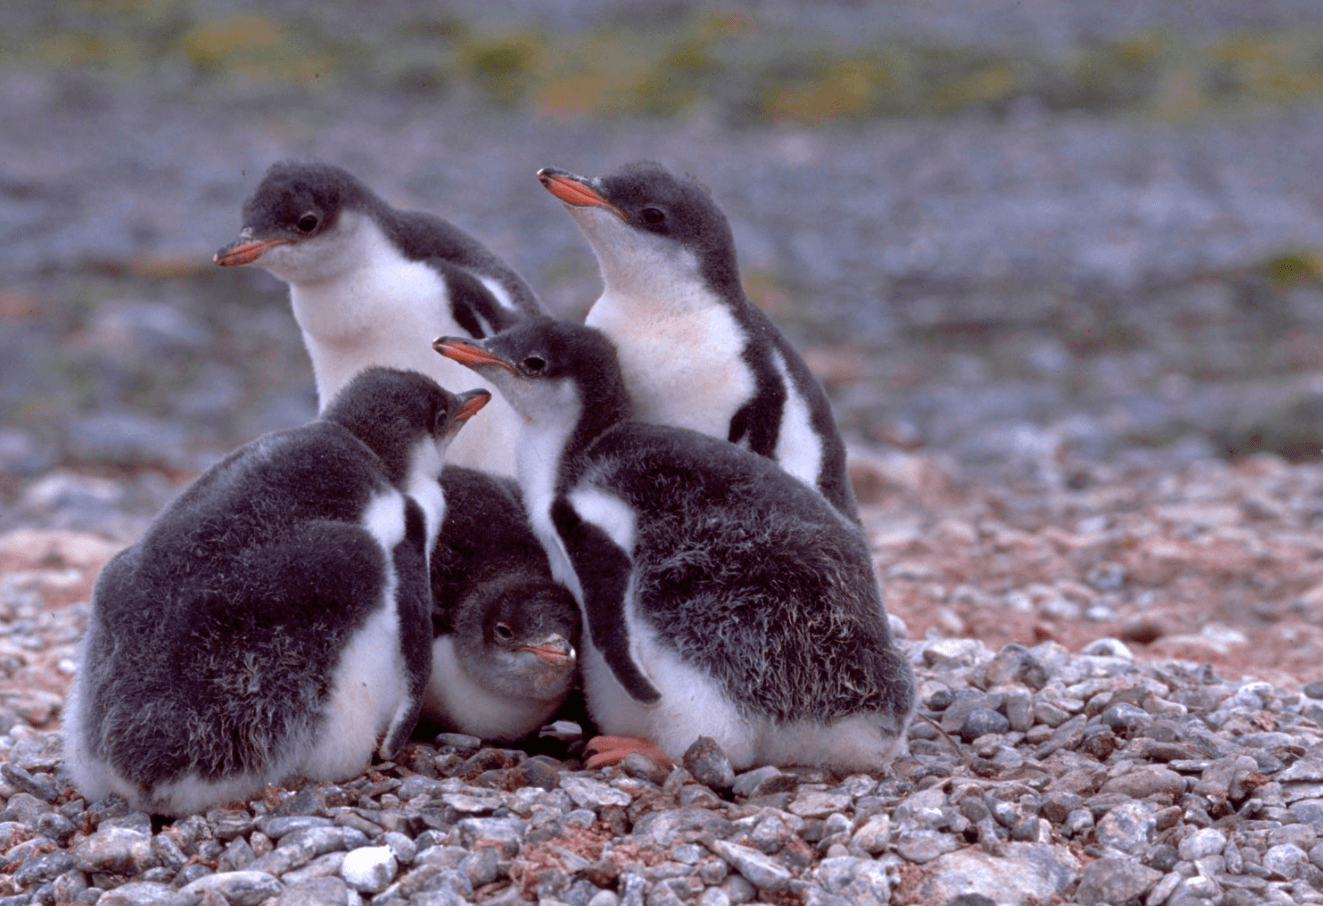 A huddle of penguin chicks. Groups of penguins are also called 